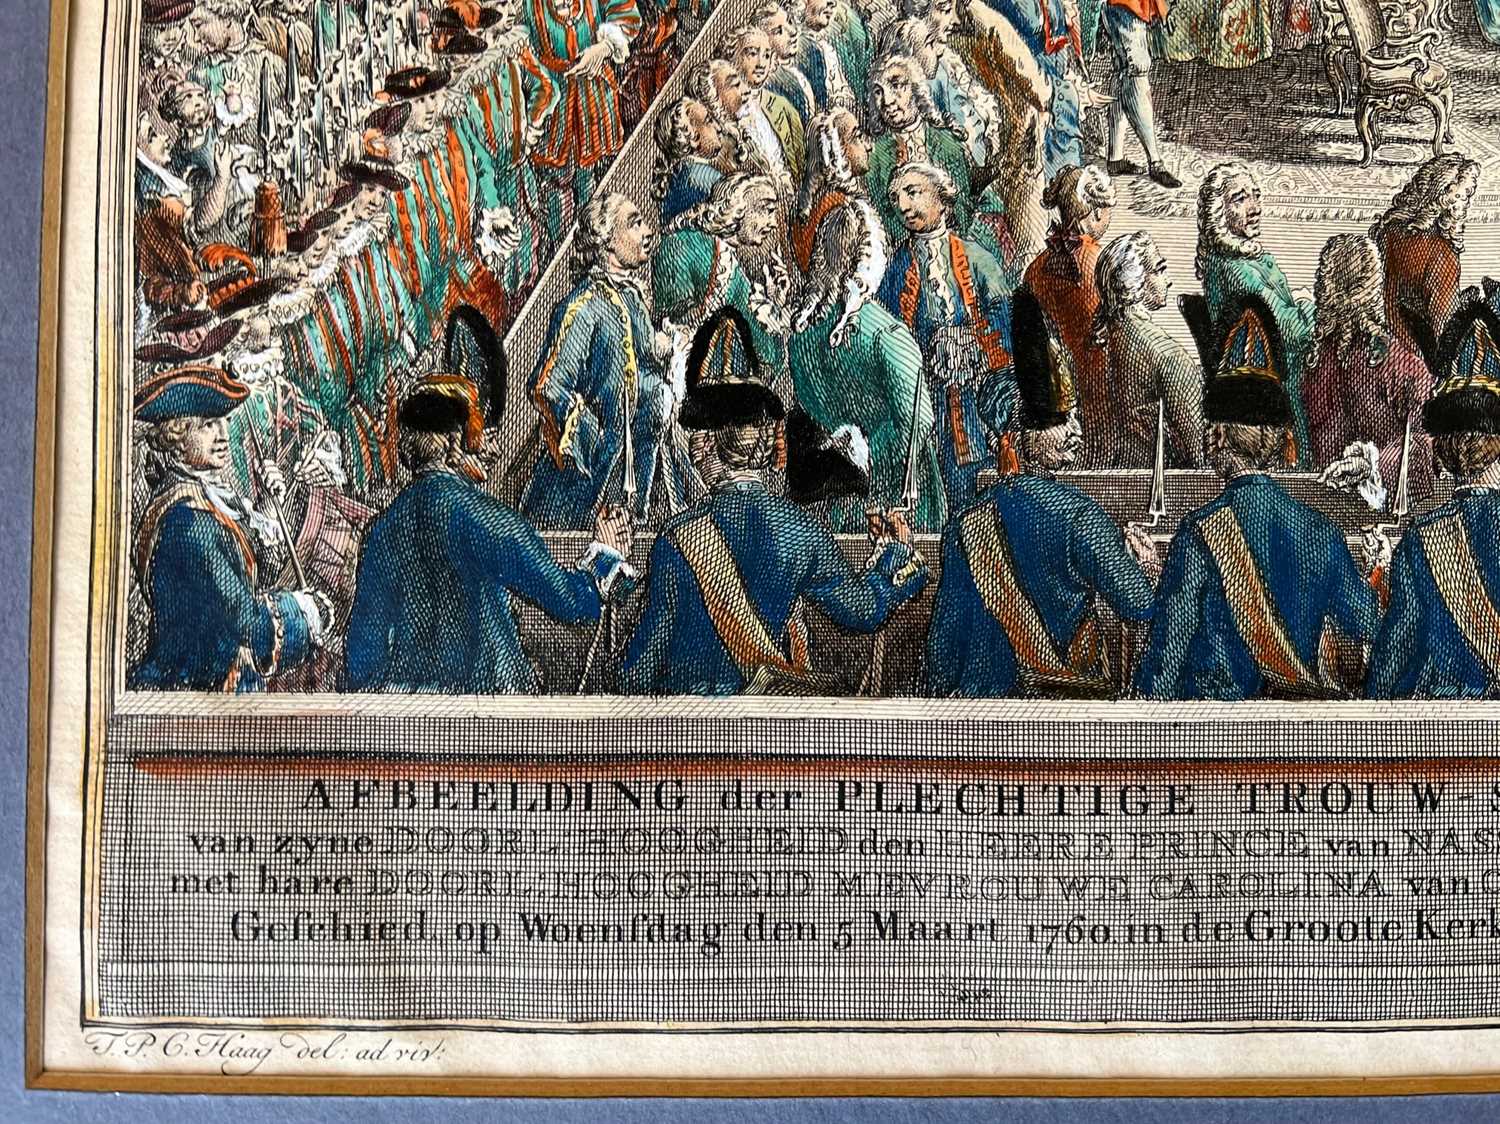 AN 18TH CENTURY HAND COLOURED ENGRAVING DEPICTING THE MARRIAGE OF PRINCE VAN NASSAU WEILBURG - Image 4 of 6